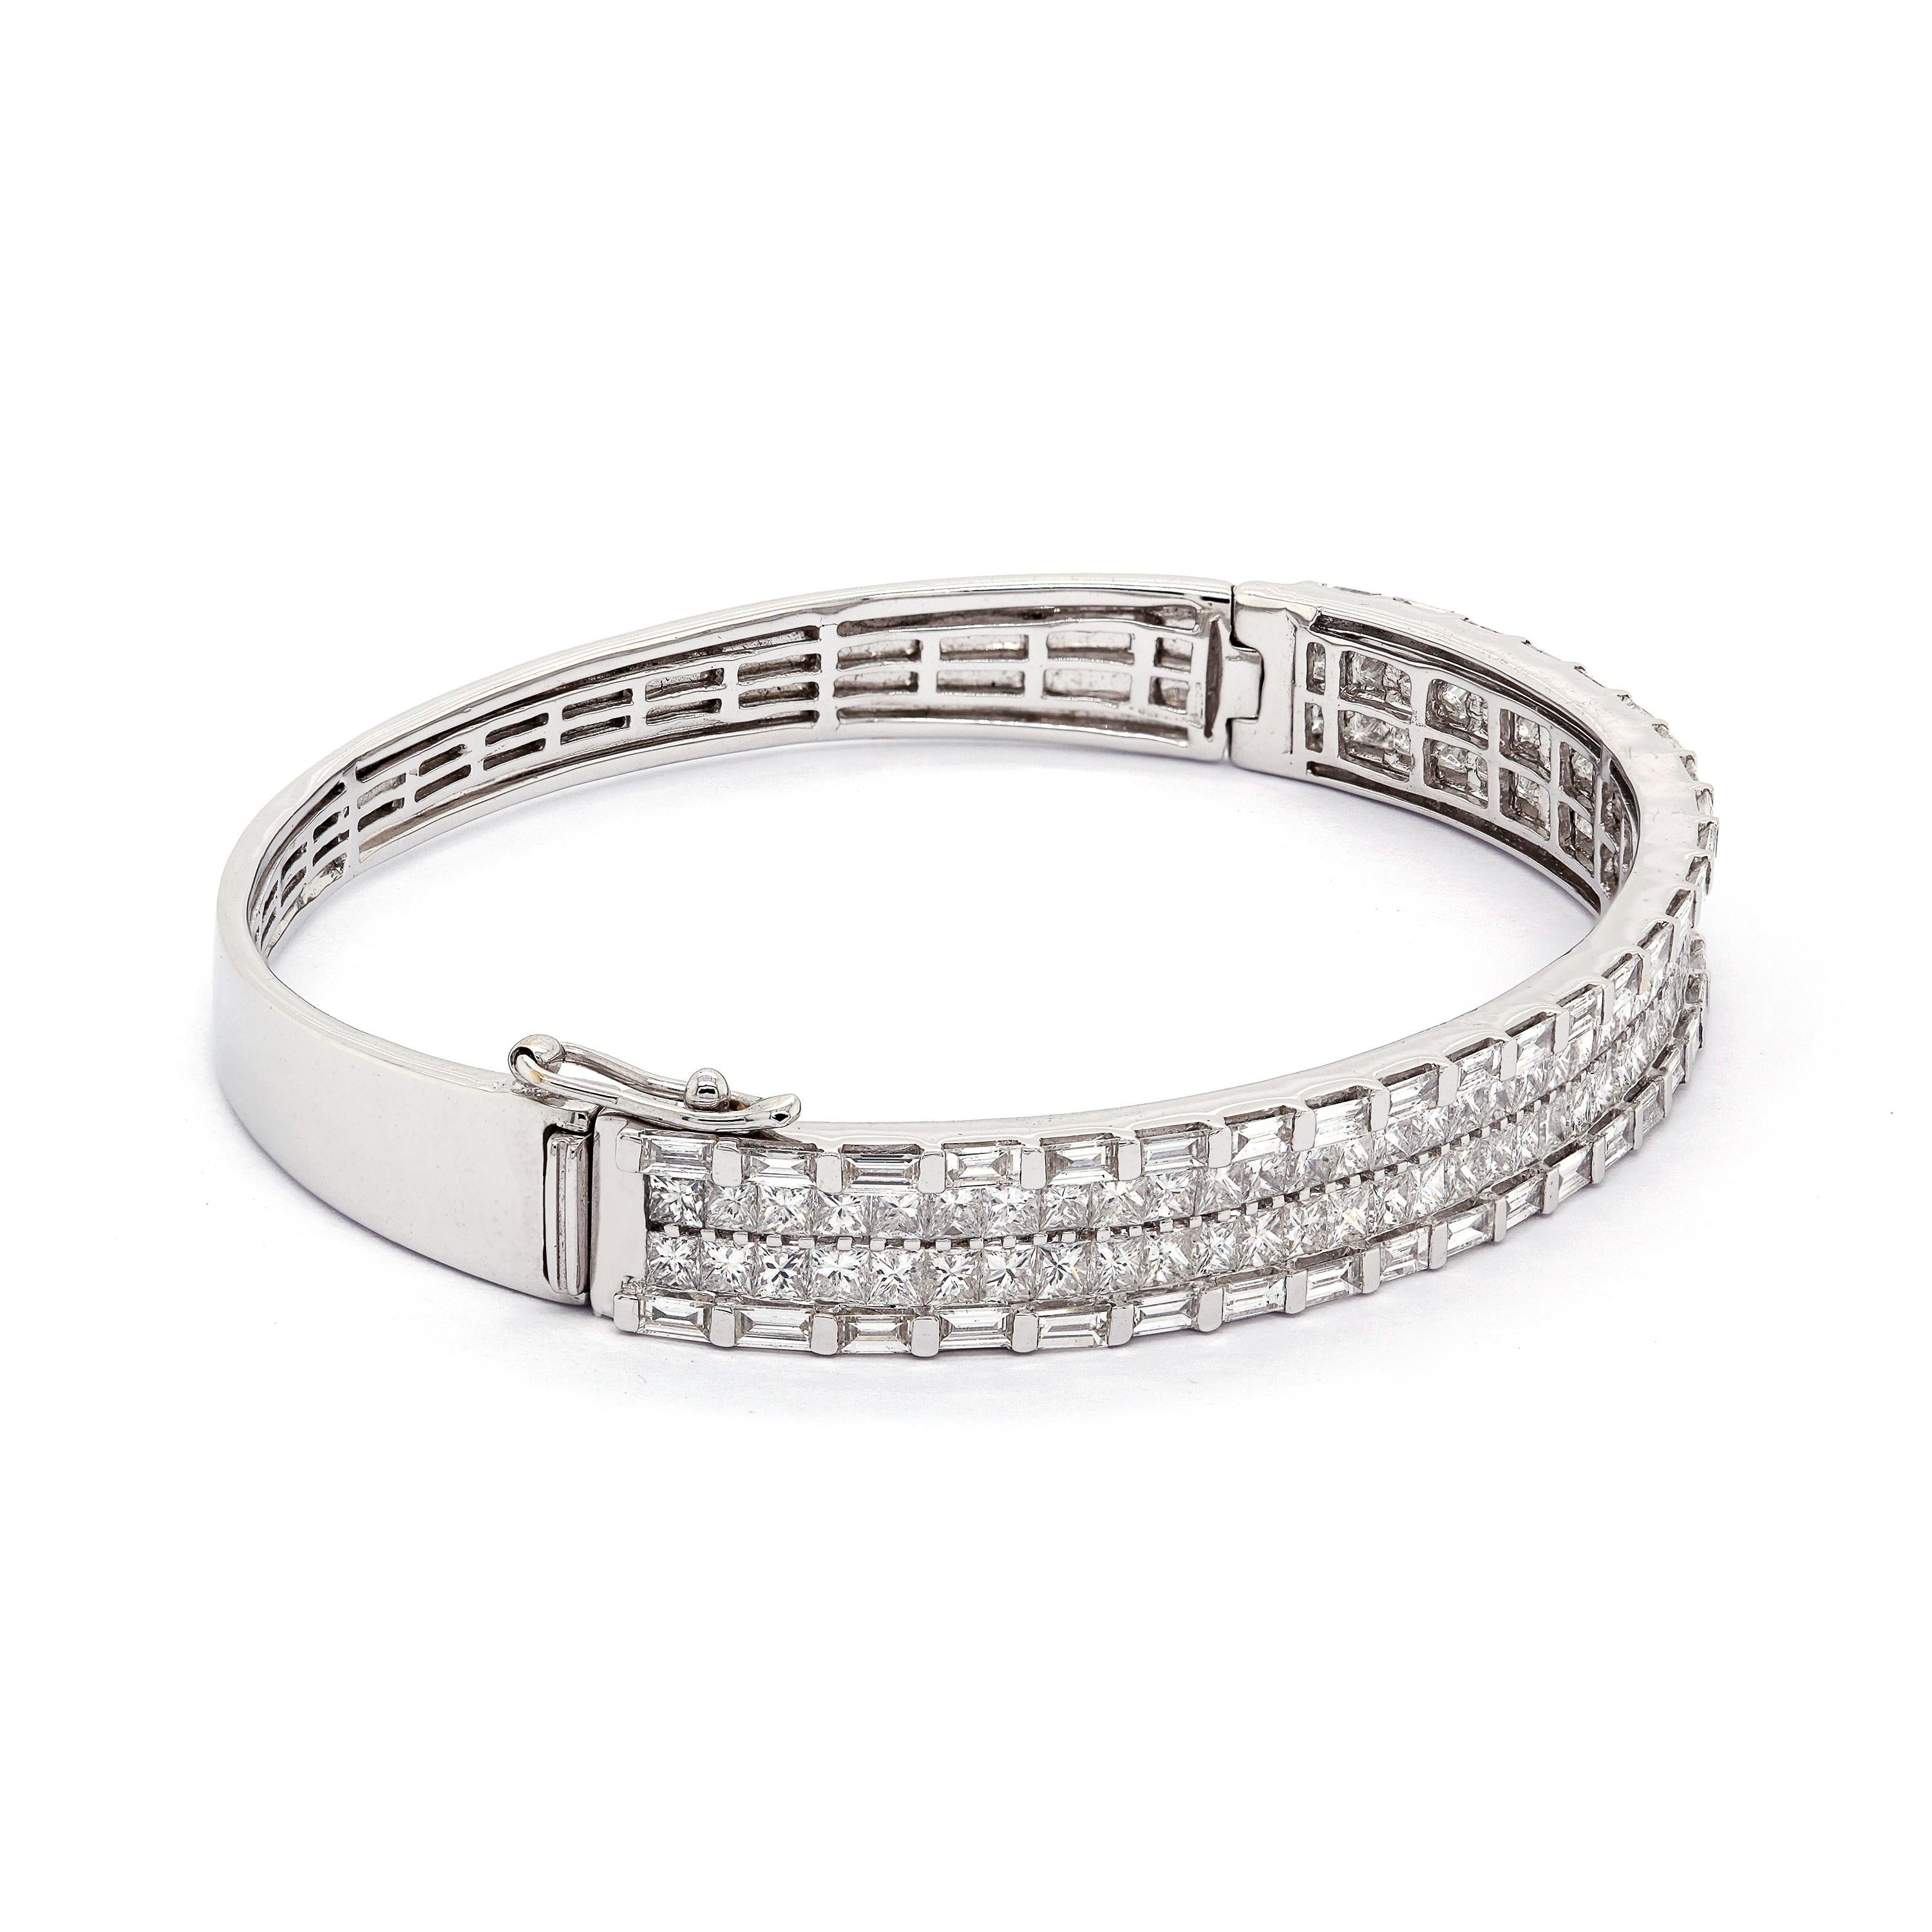 This stunning modern diamond bracelet will not only take your breath away, but will also light up any ensemble. 6.20 carat of brilliant princess-cut diamonds are perfectly set to form a one of a kind look. 

Diamond: 6.20 Carat
18K White Gold: 20.42